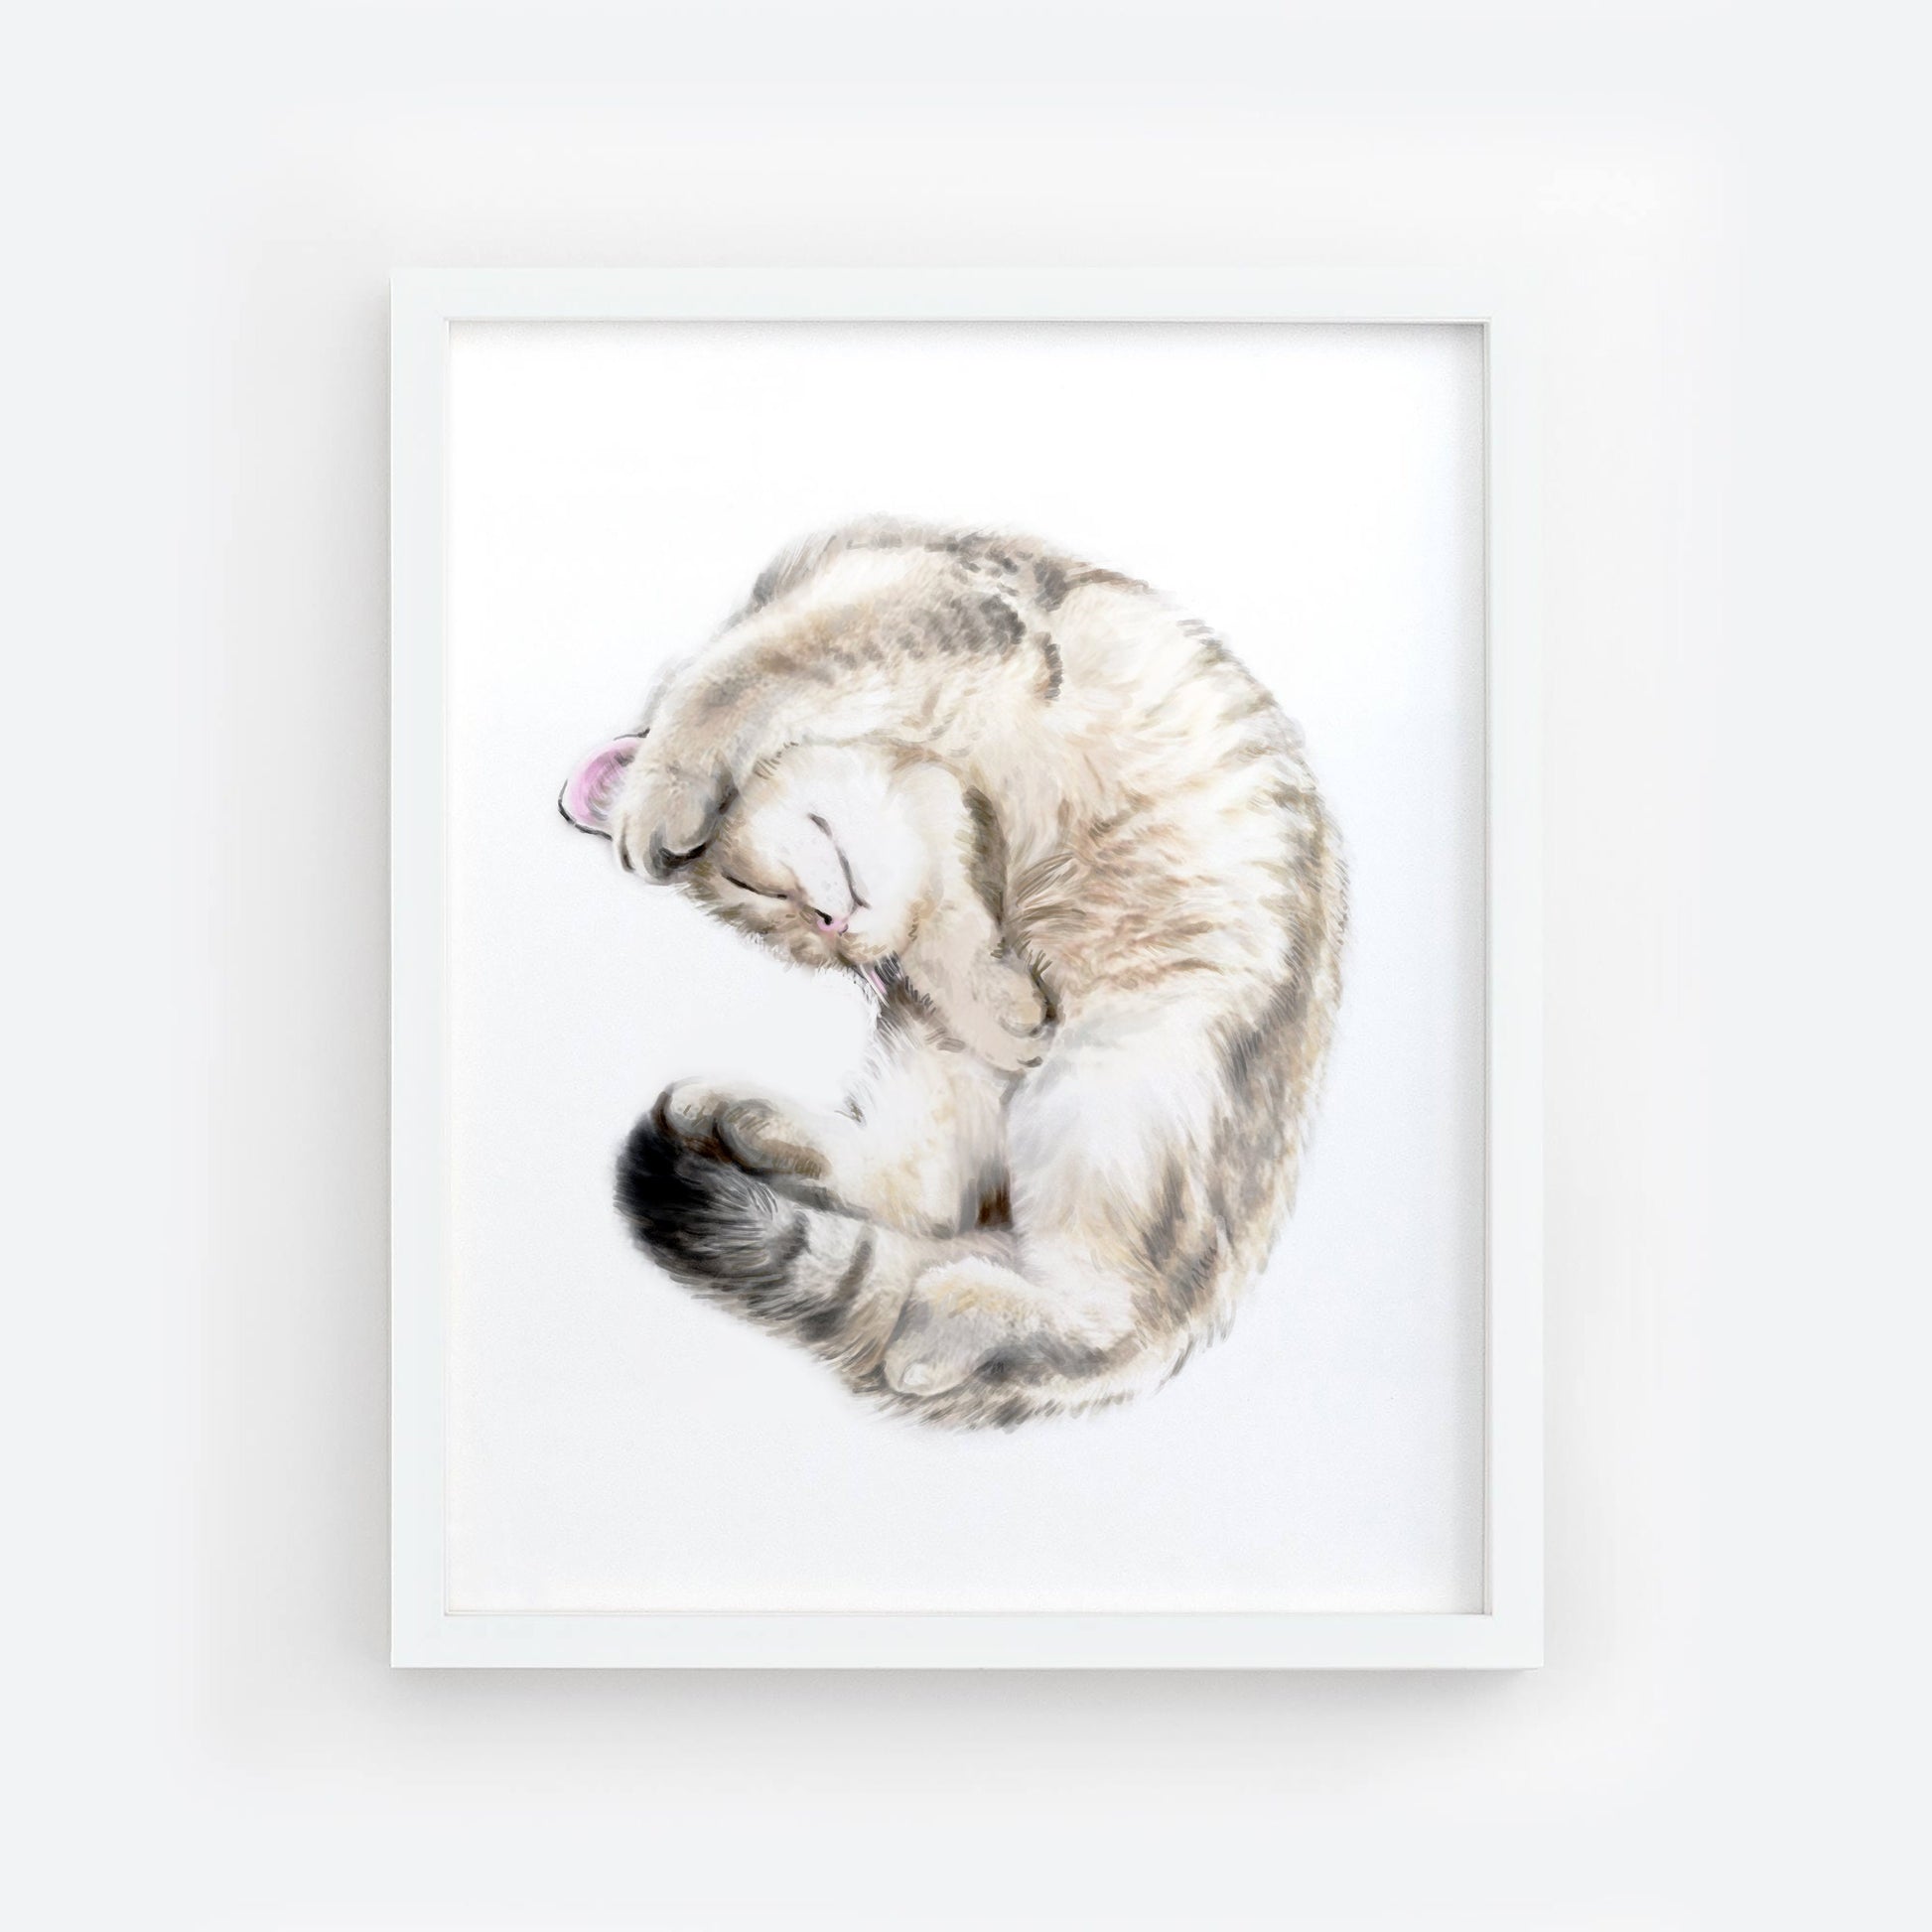 Cuddly Tabby Cat Watercolor Painting, Home Wall Decor, Art Print, Crazy Cat Lady, Cat Lover Gift, Minimal, British Shorthair for Cat Mom